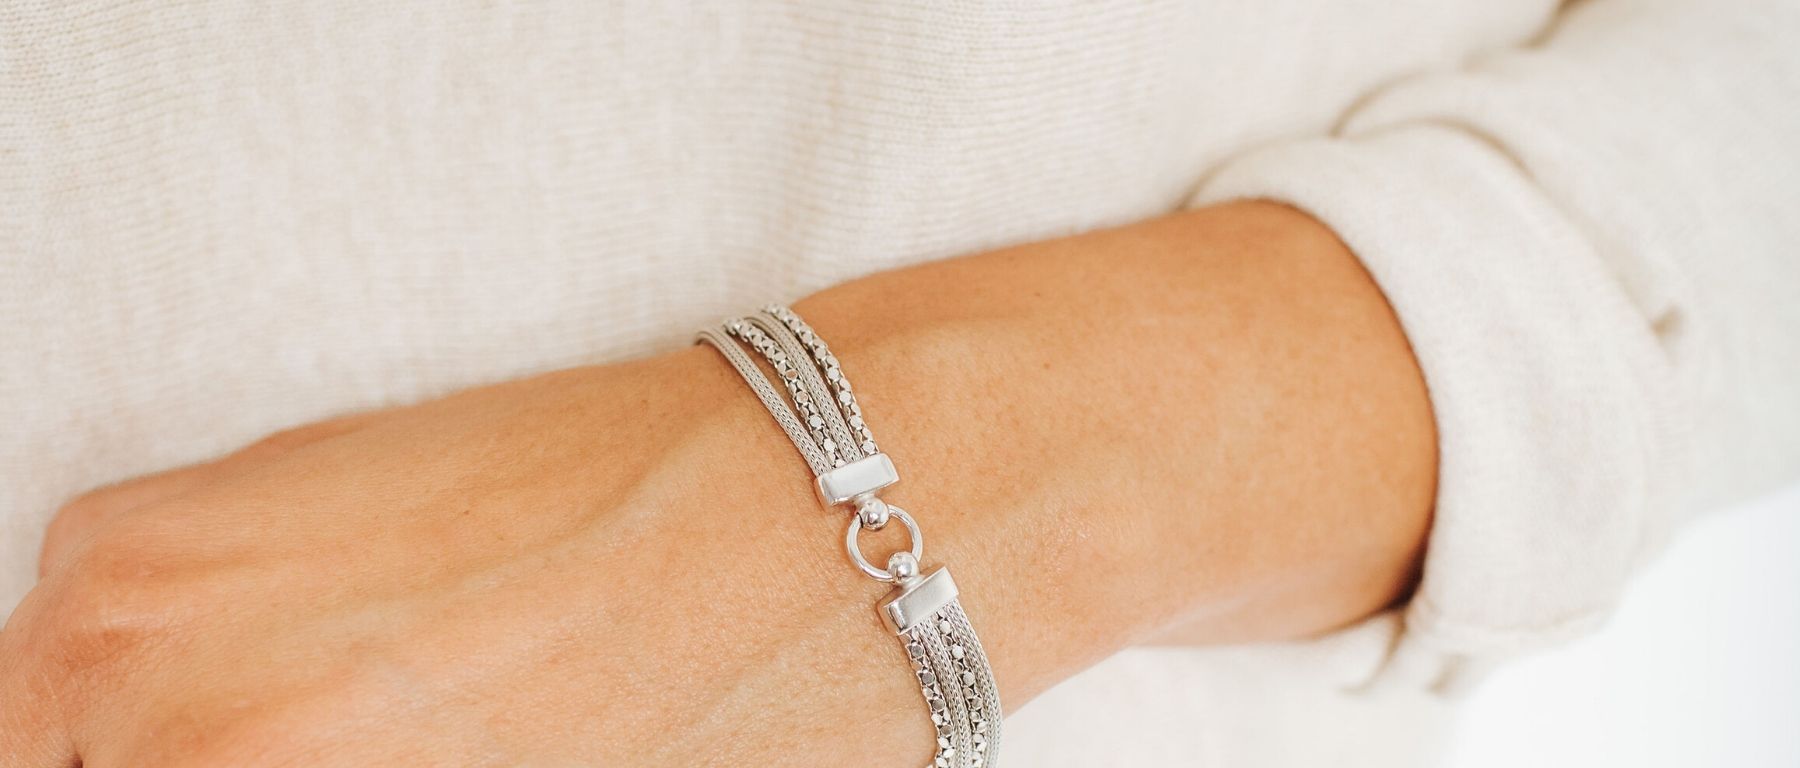 What's the Difference Between Sterling Silver and Regular Silver?